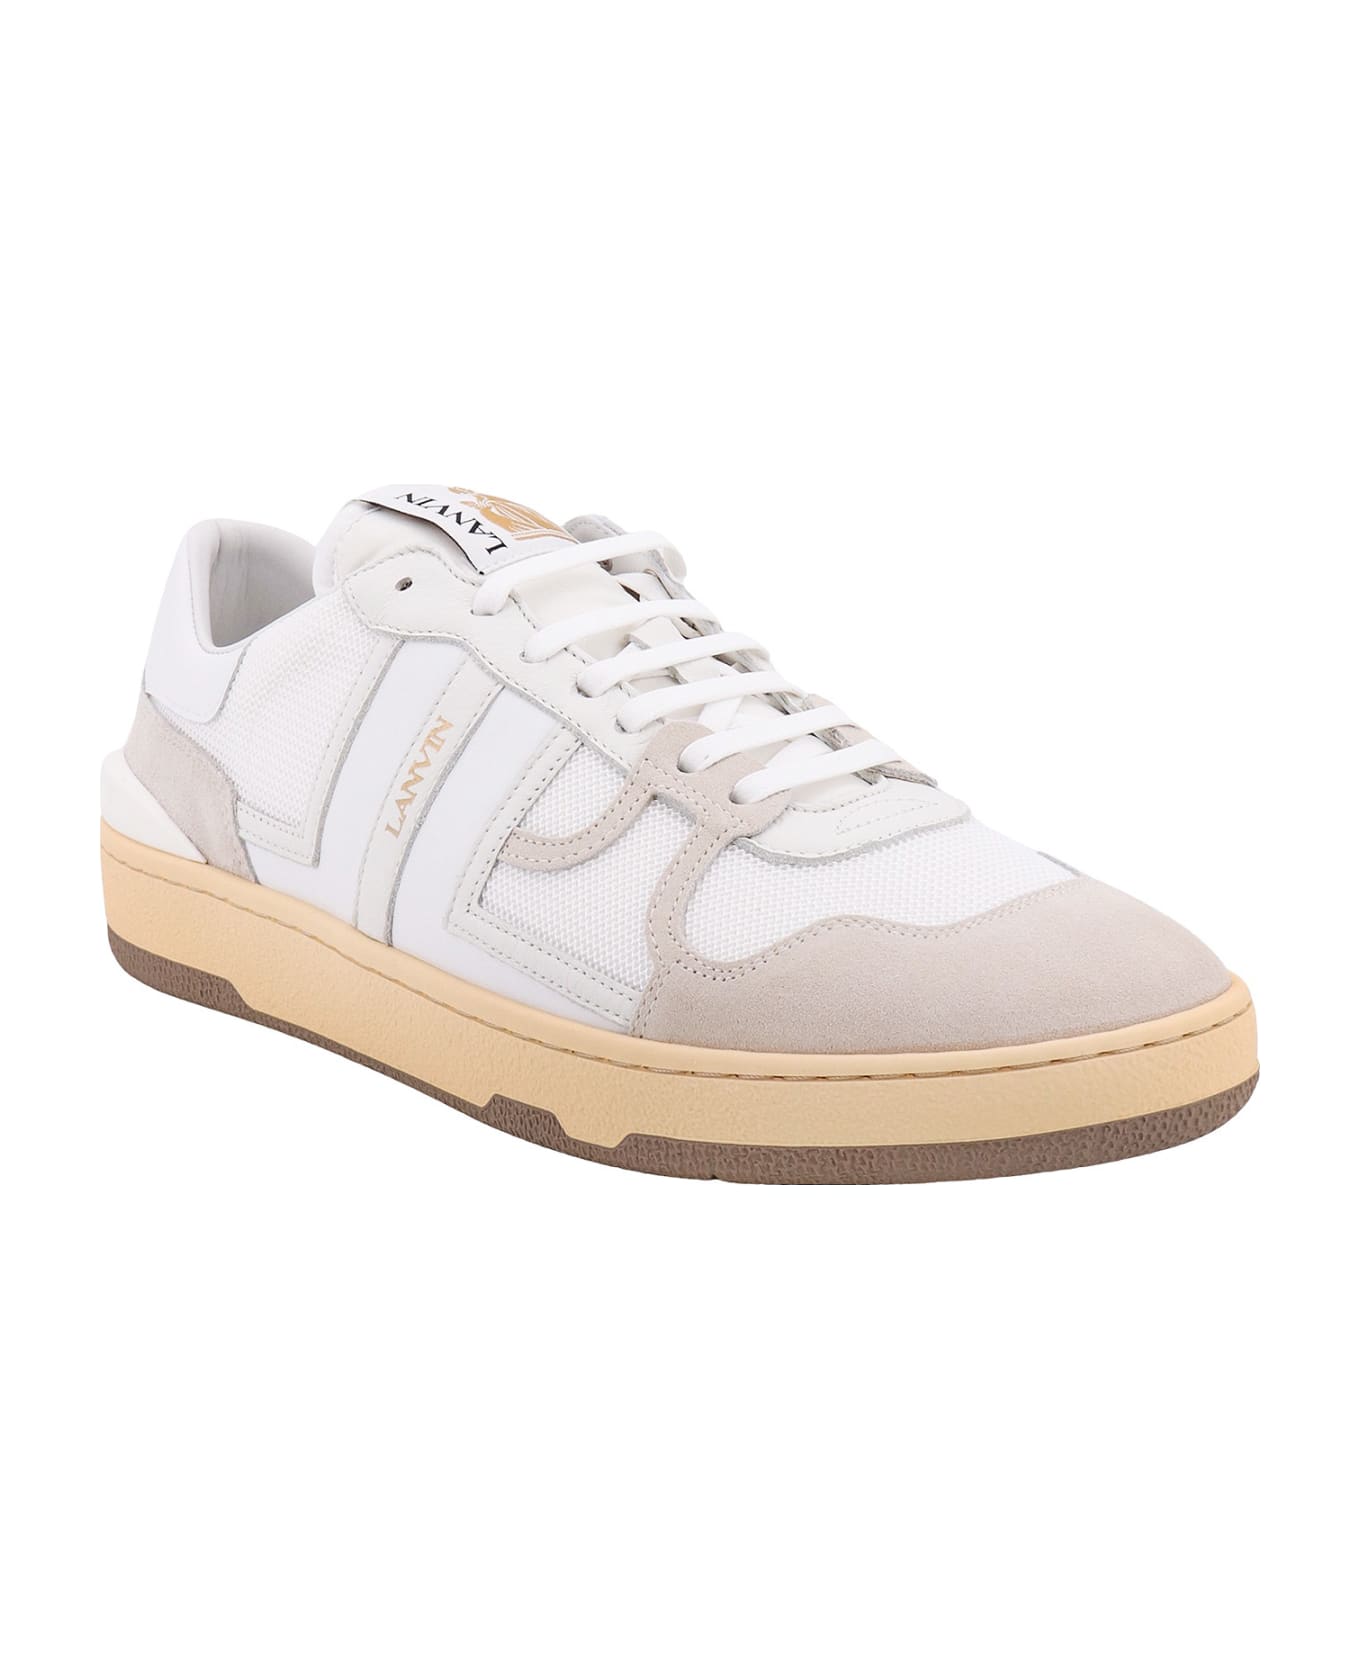 Lanvin Clay Low Sneakers - White スニーカー